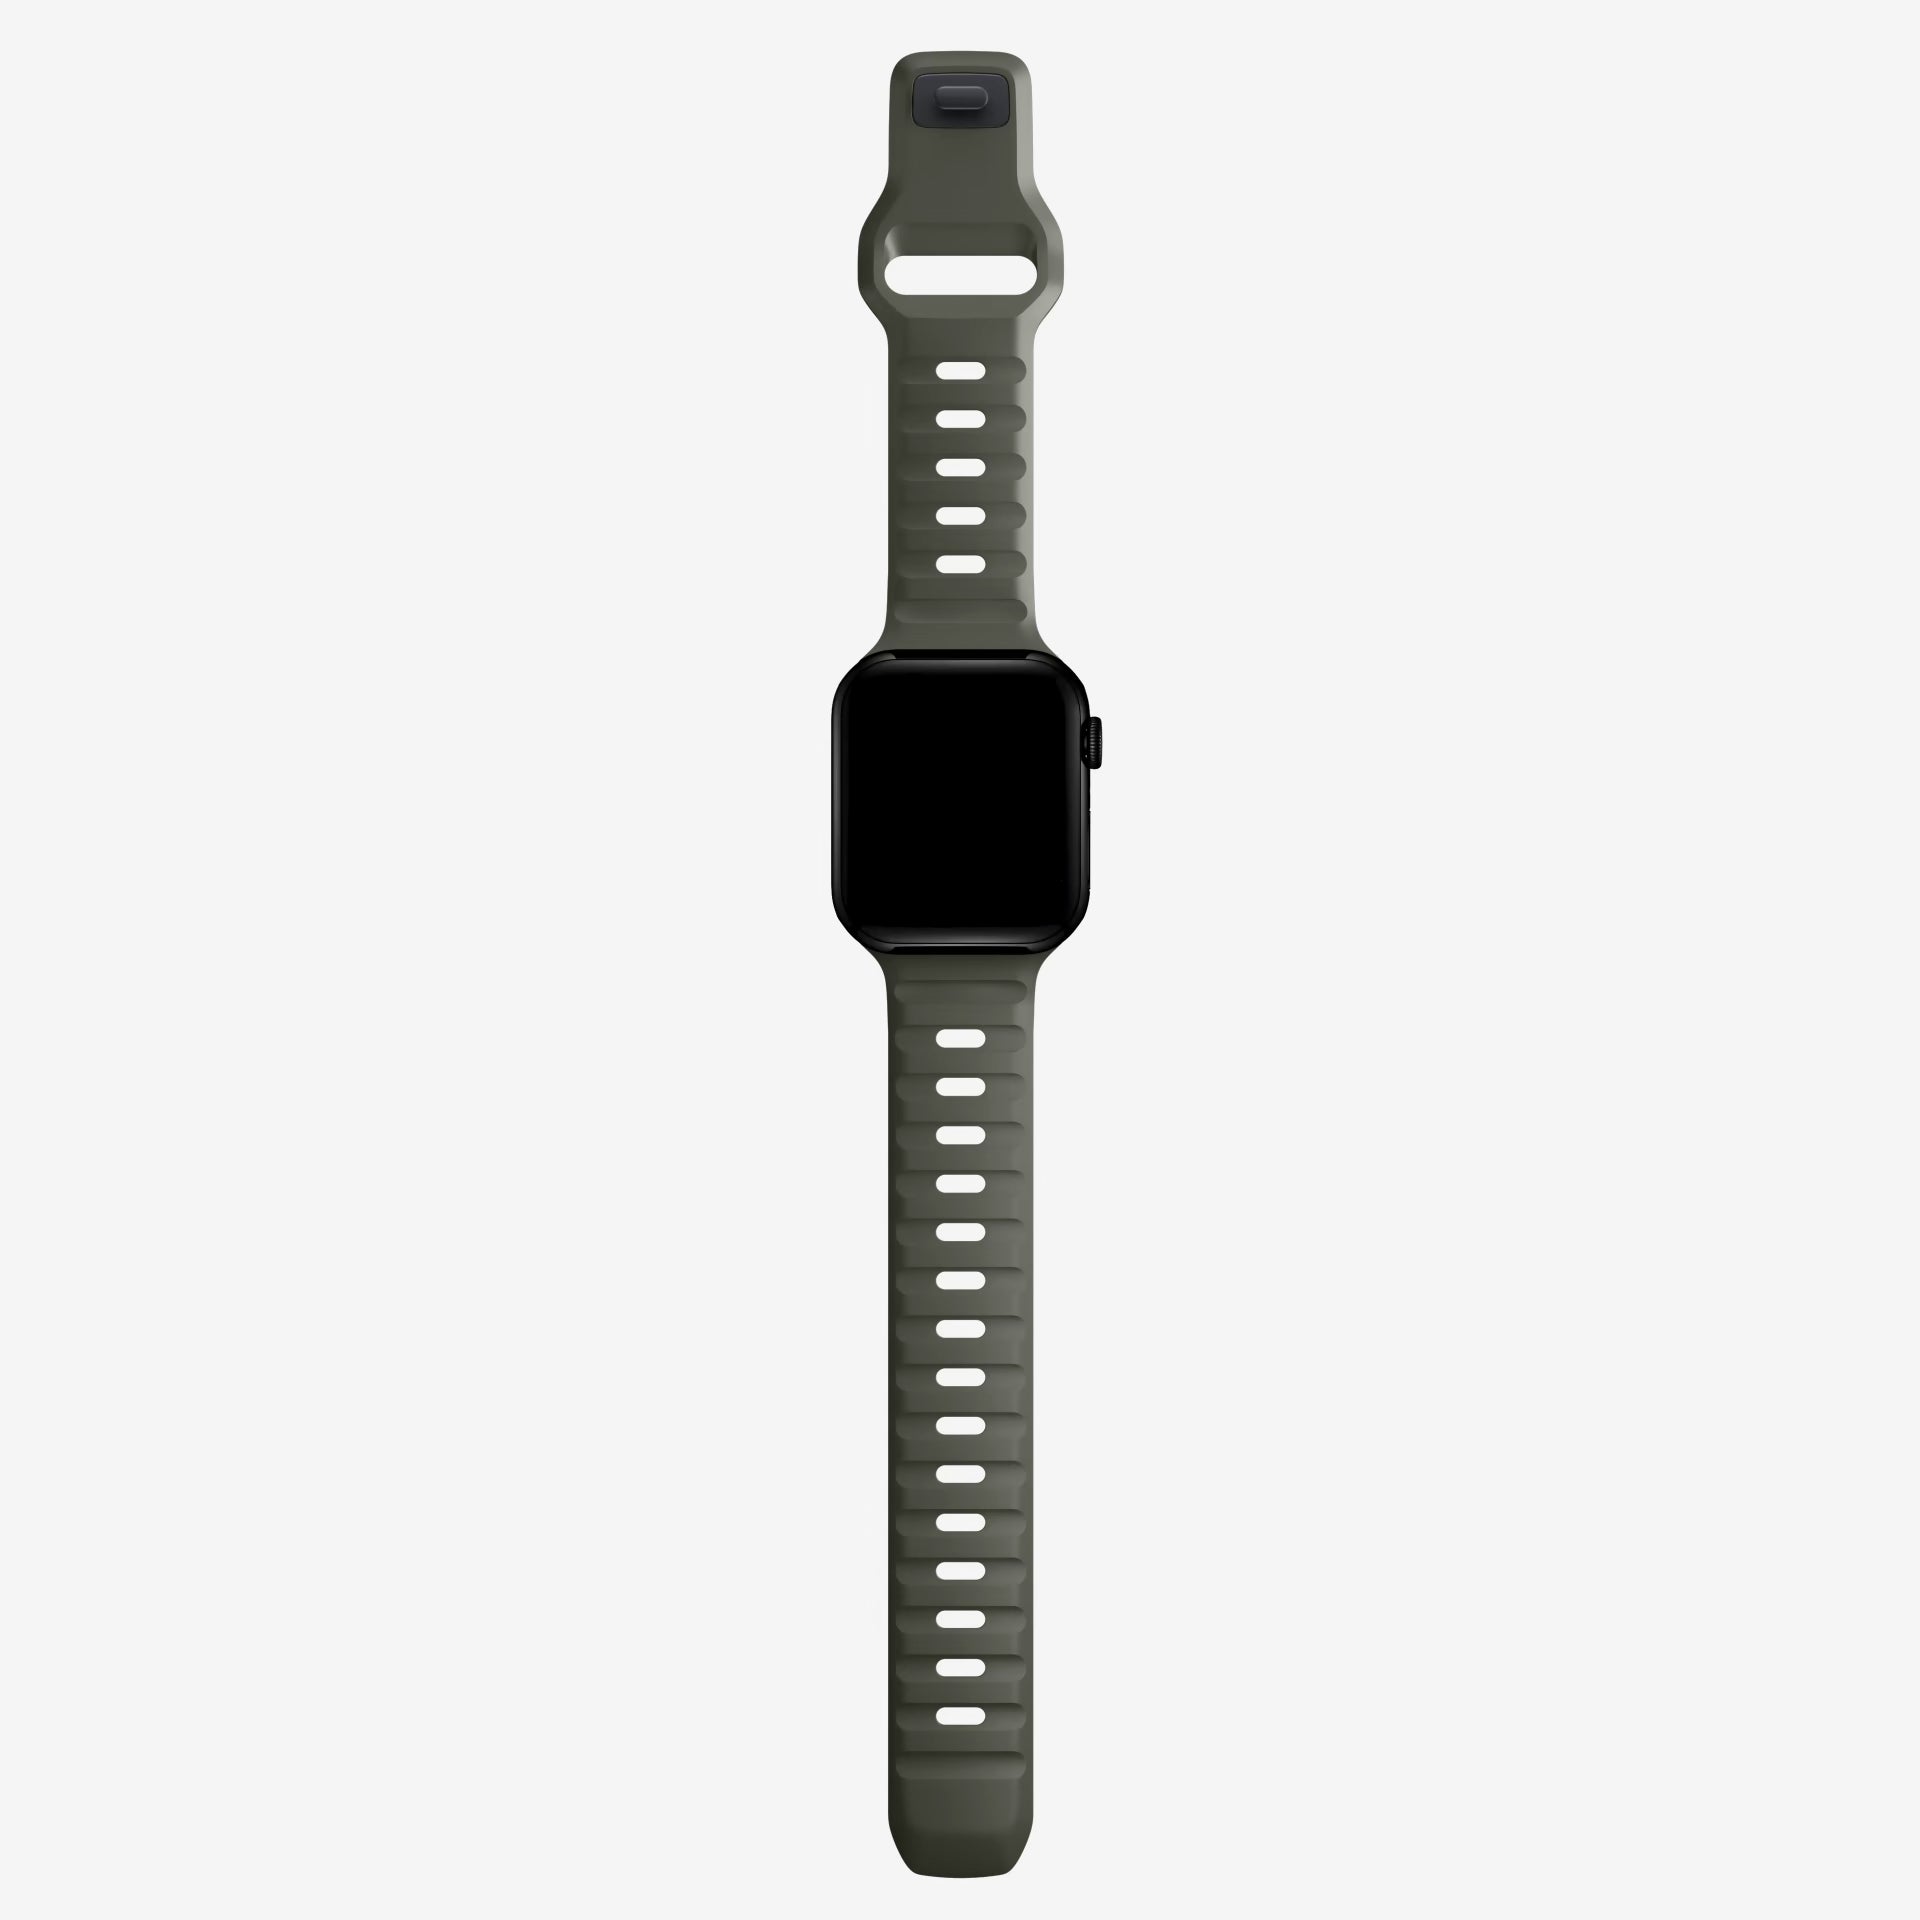 An ash green colour silicon watch strap for apple watch designed for sports and active activities